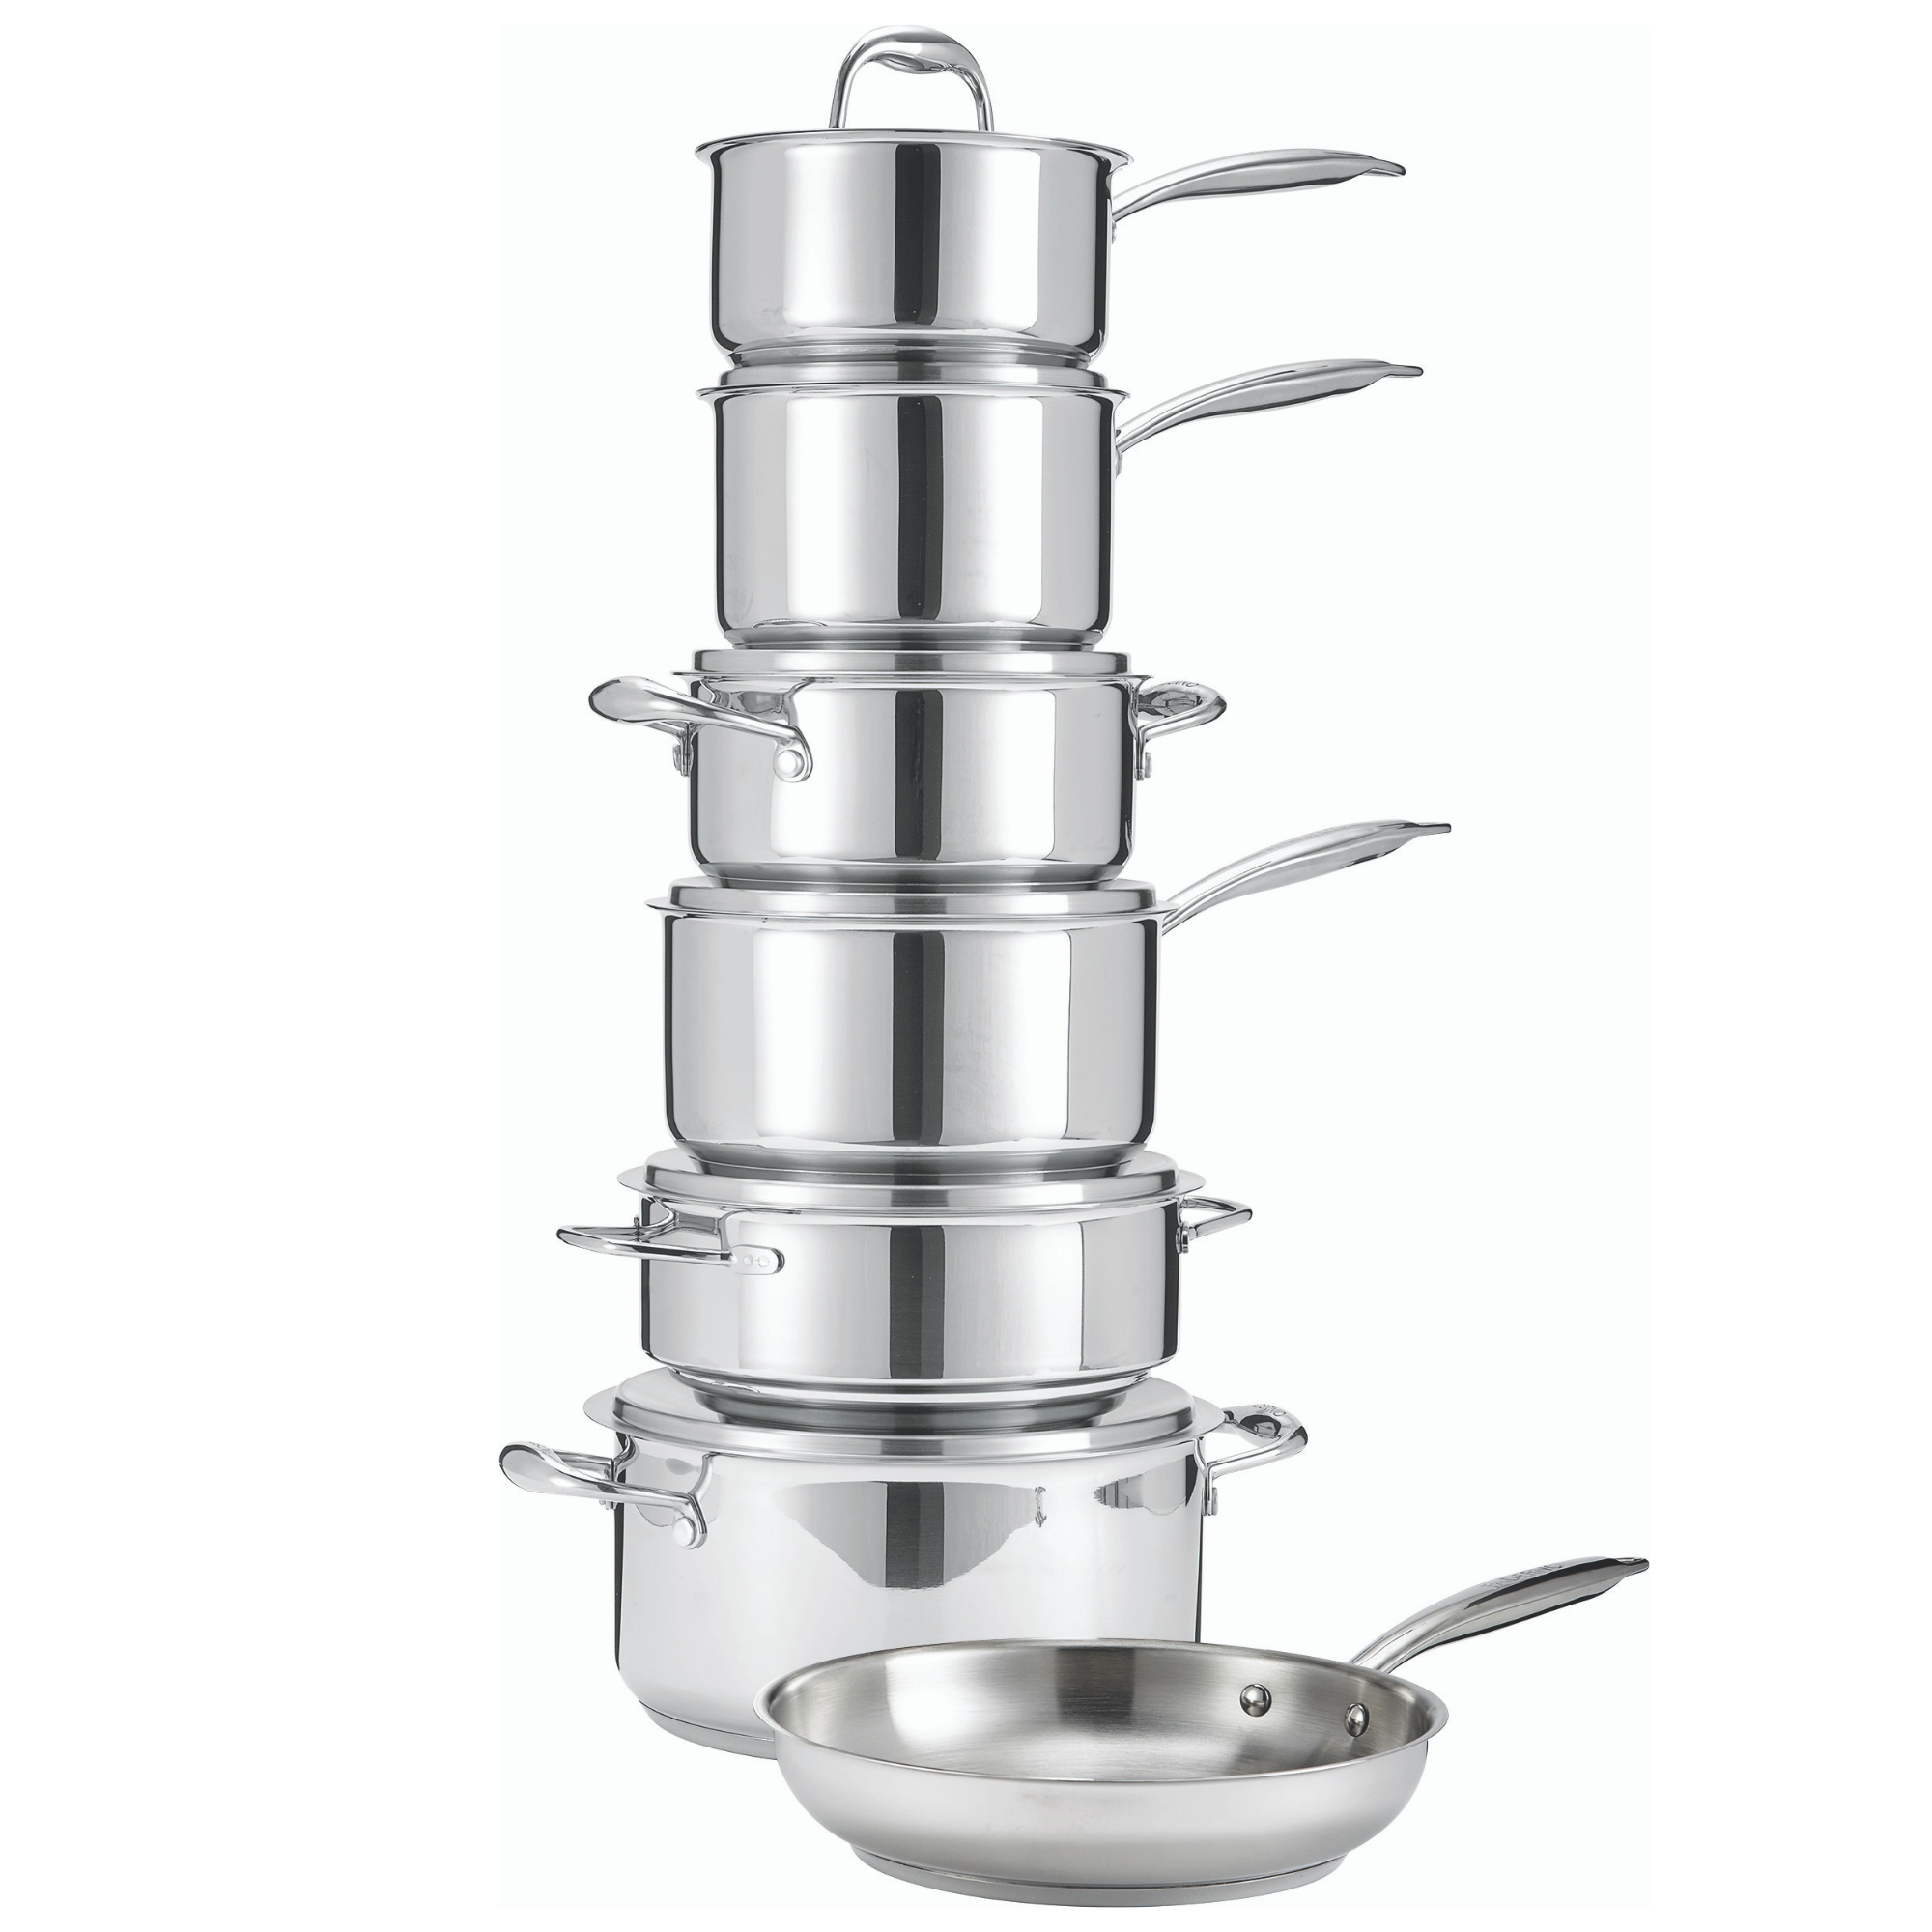 Paderno Stainless Steel 19 Quart Rondeau Pot